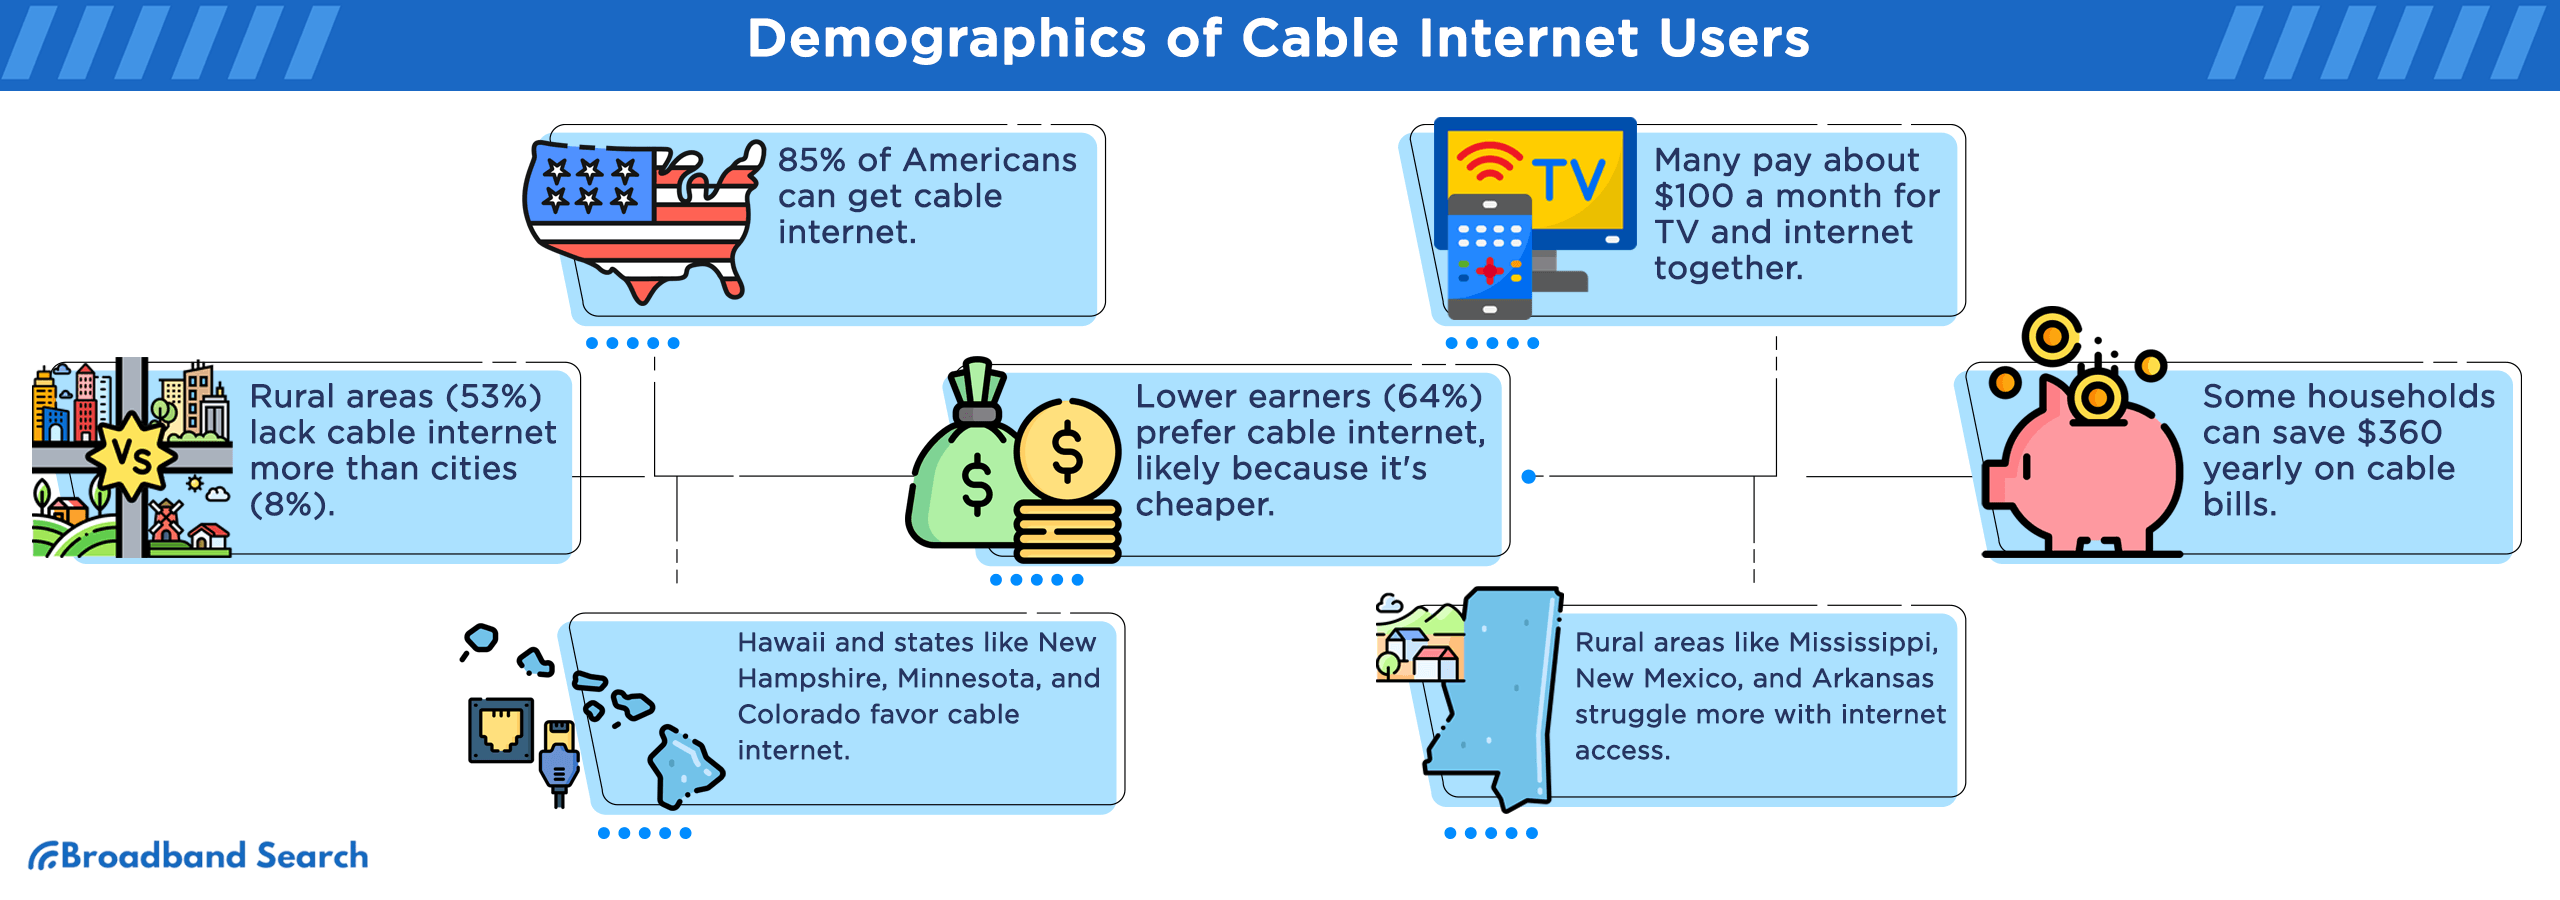 Demographics of cable internet users